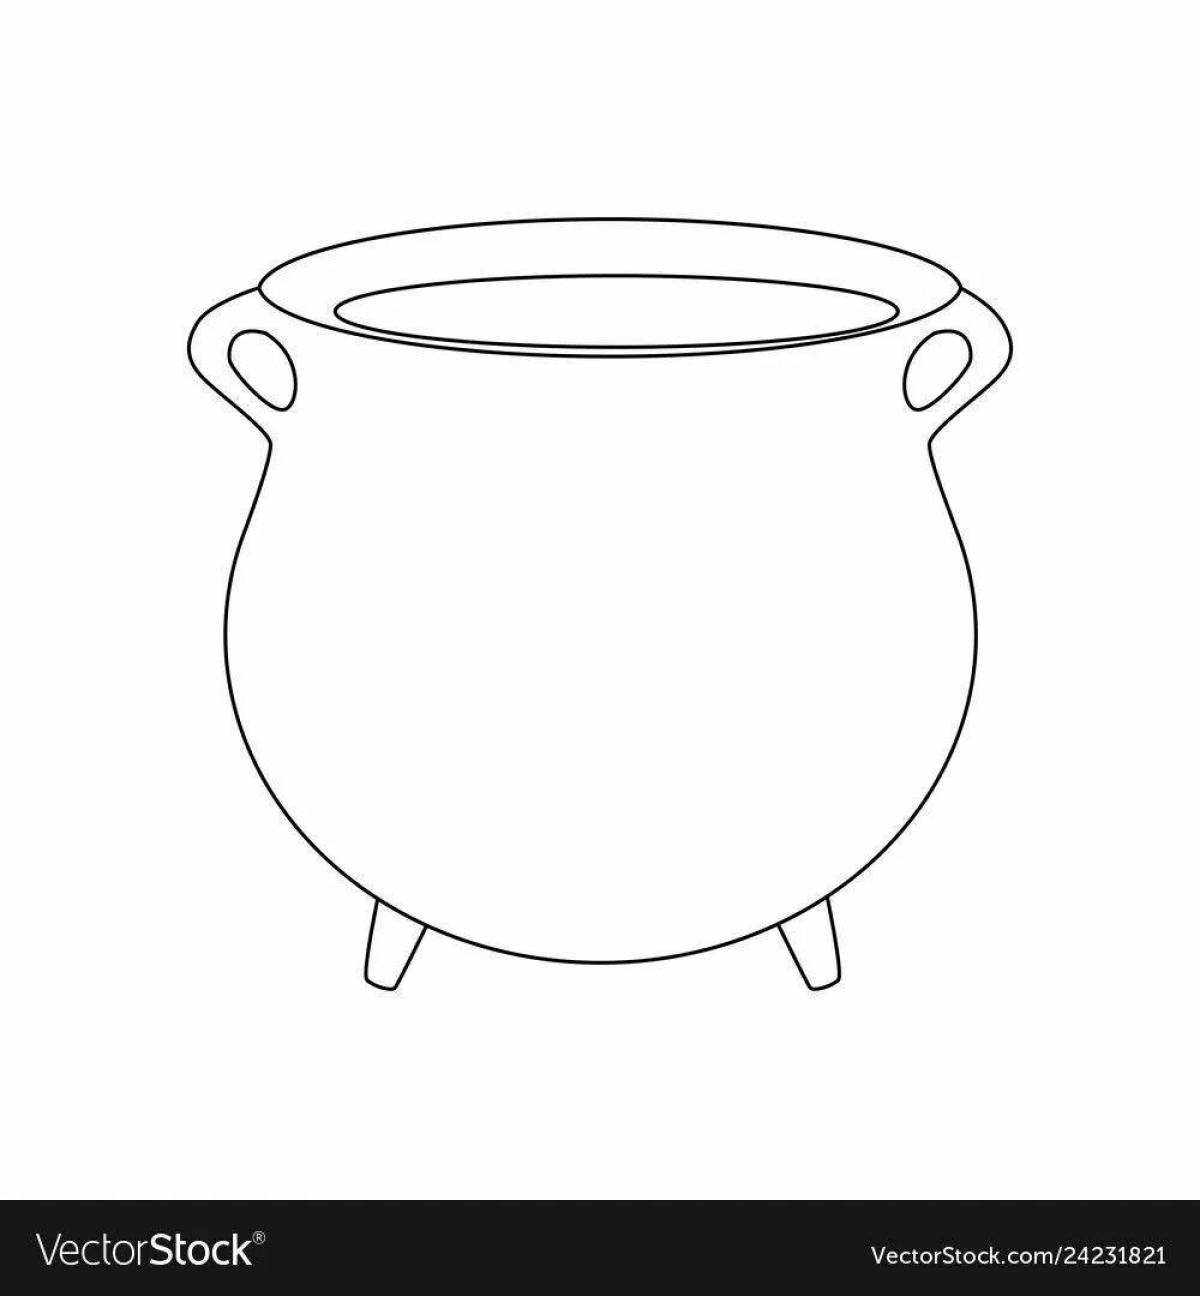 Luminous cast iron coloring page